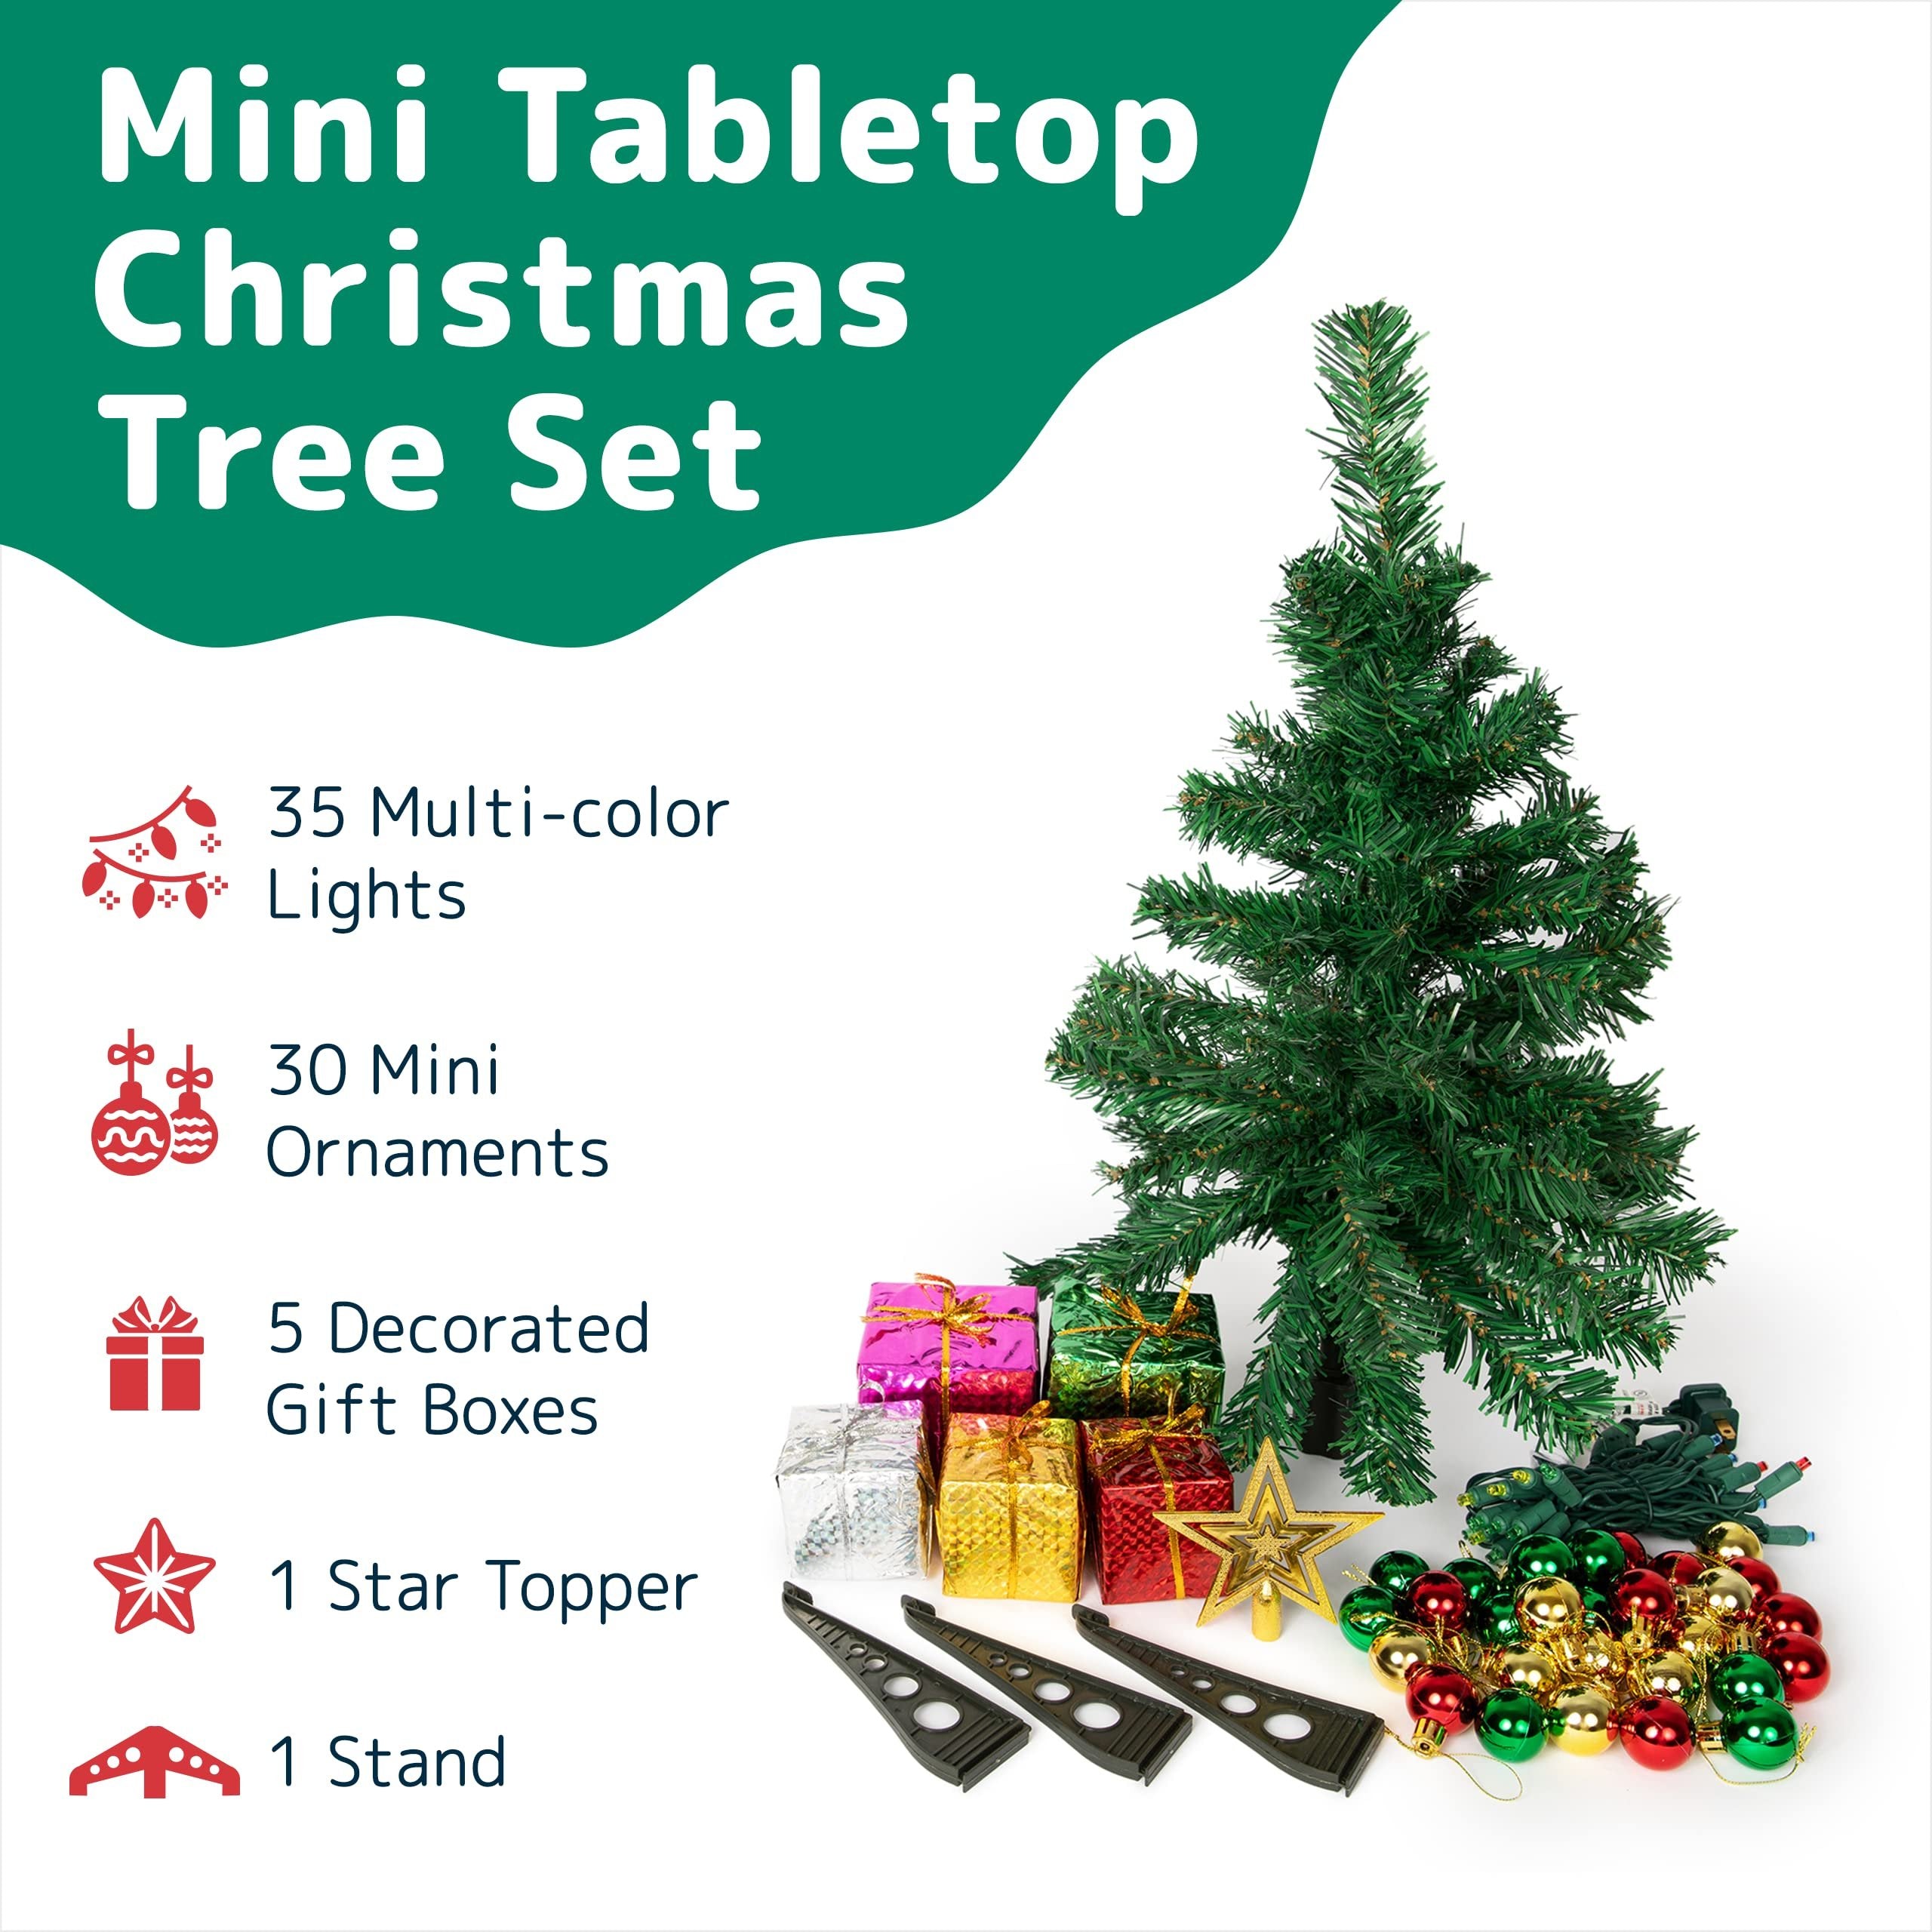 Prextex 23-Inch DIY Tabletop Mini Christmas Tree with Multi-Color LED Lights, Star Treetop, Decorated Gift Boxes and Hanging Ornaments for DIY Christmas Decoration | Little Christmas Tree with Lights